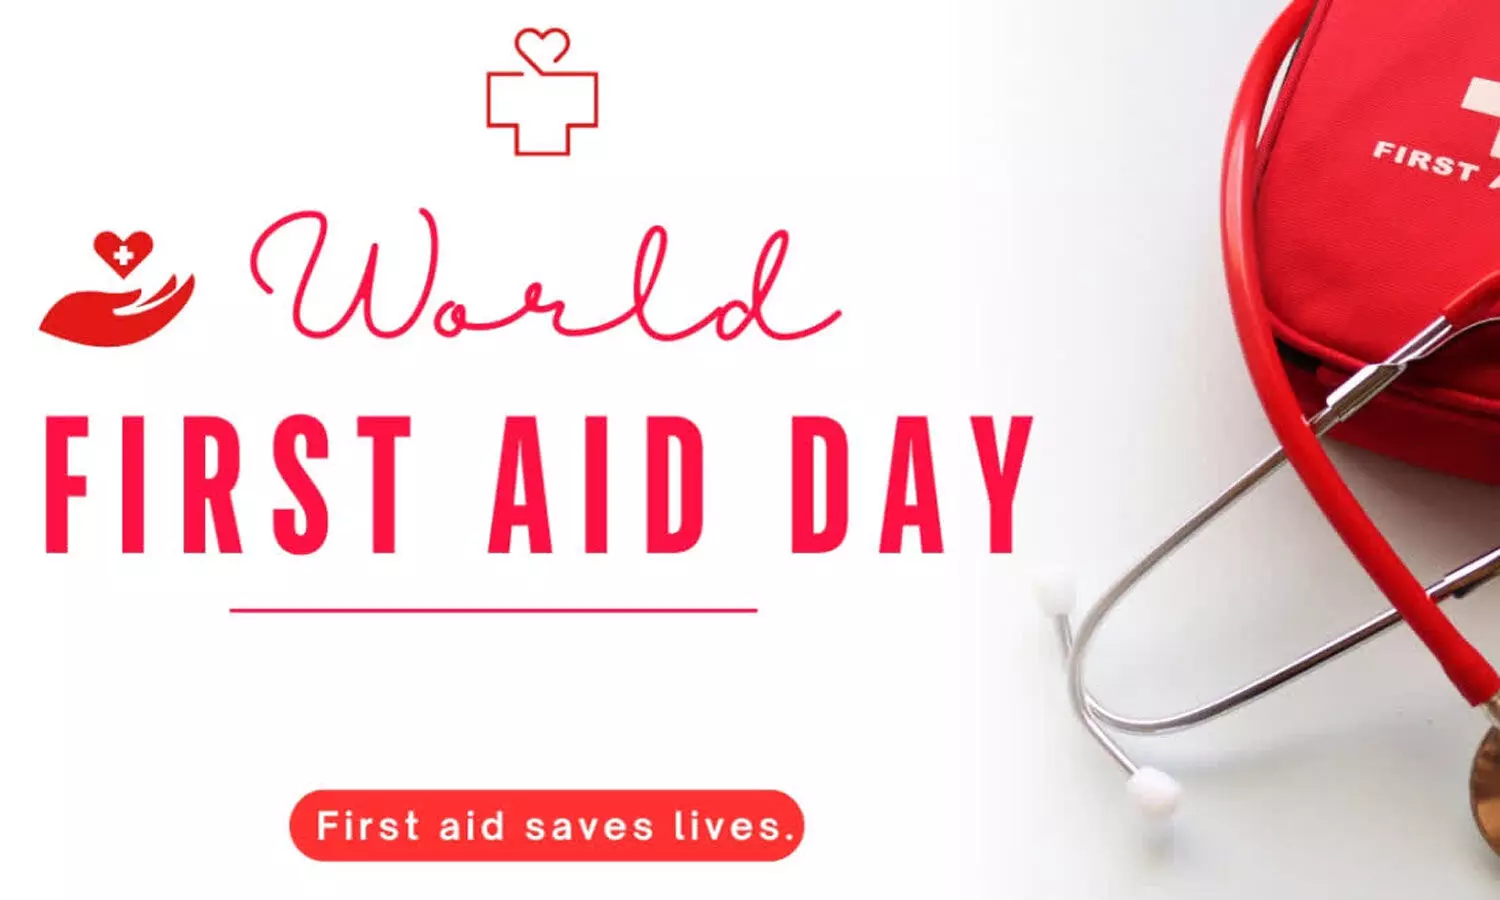 World First Aid Day - Check out the history, importance, meaning and basic first aid we should all know